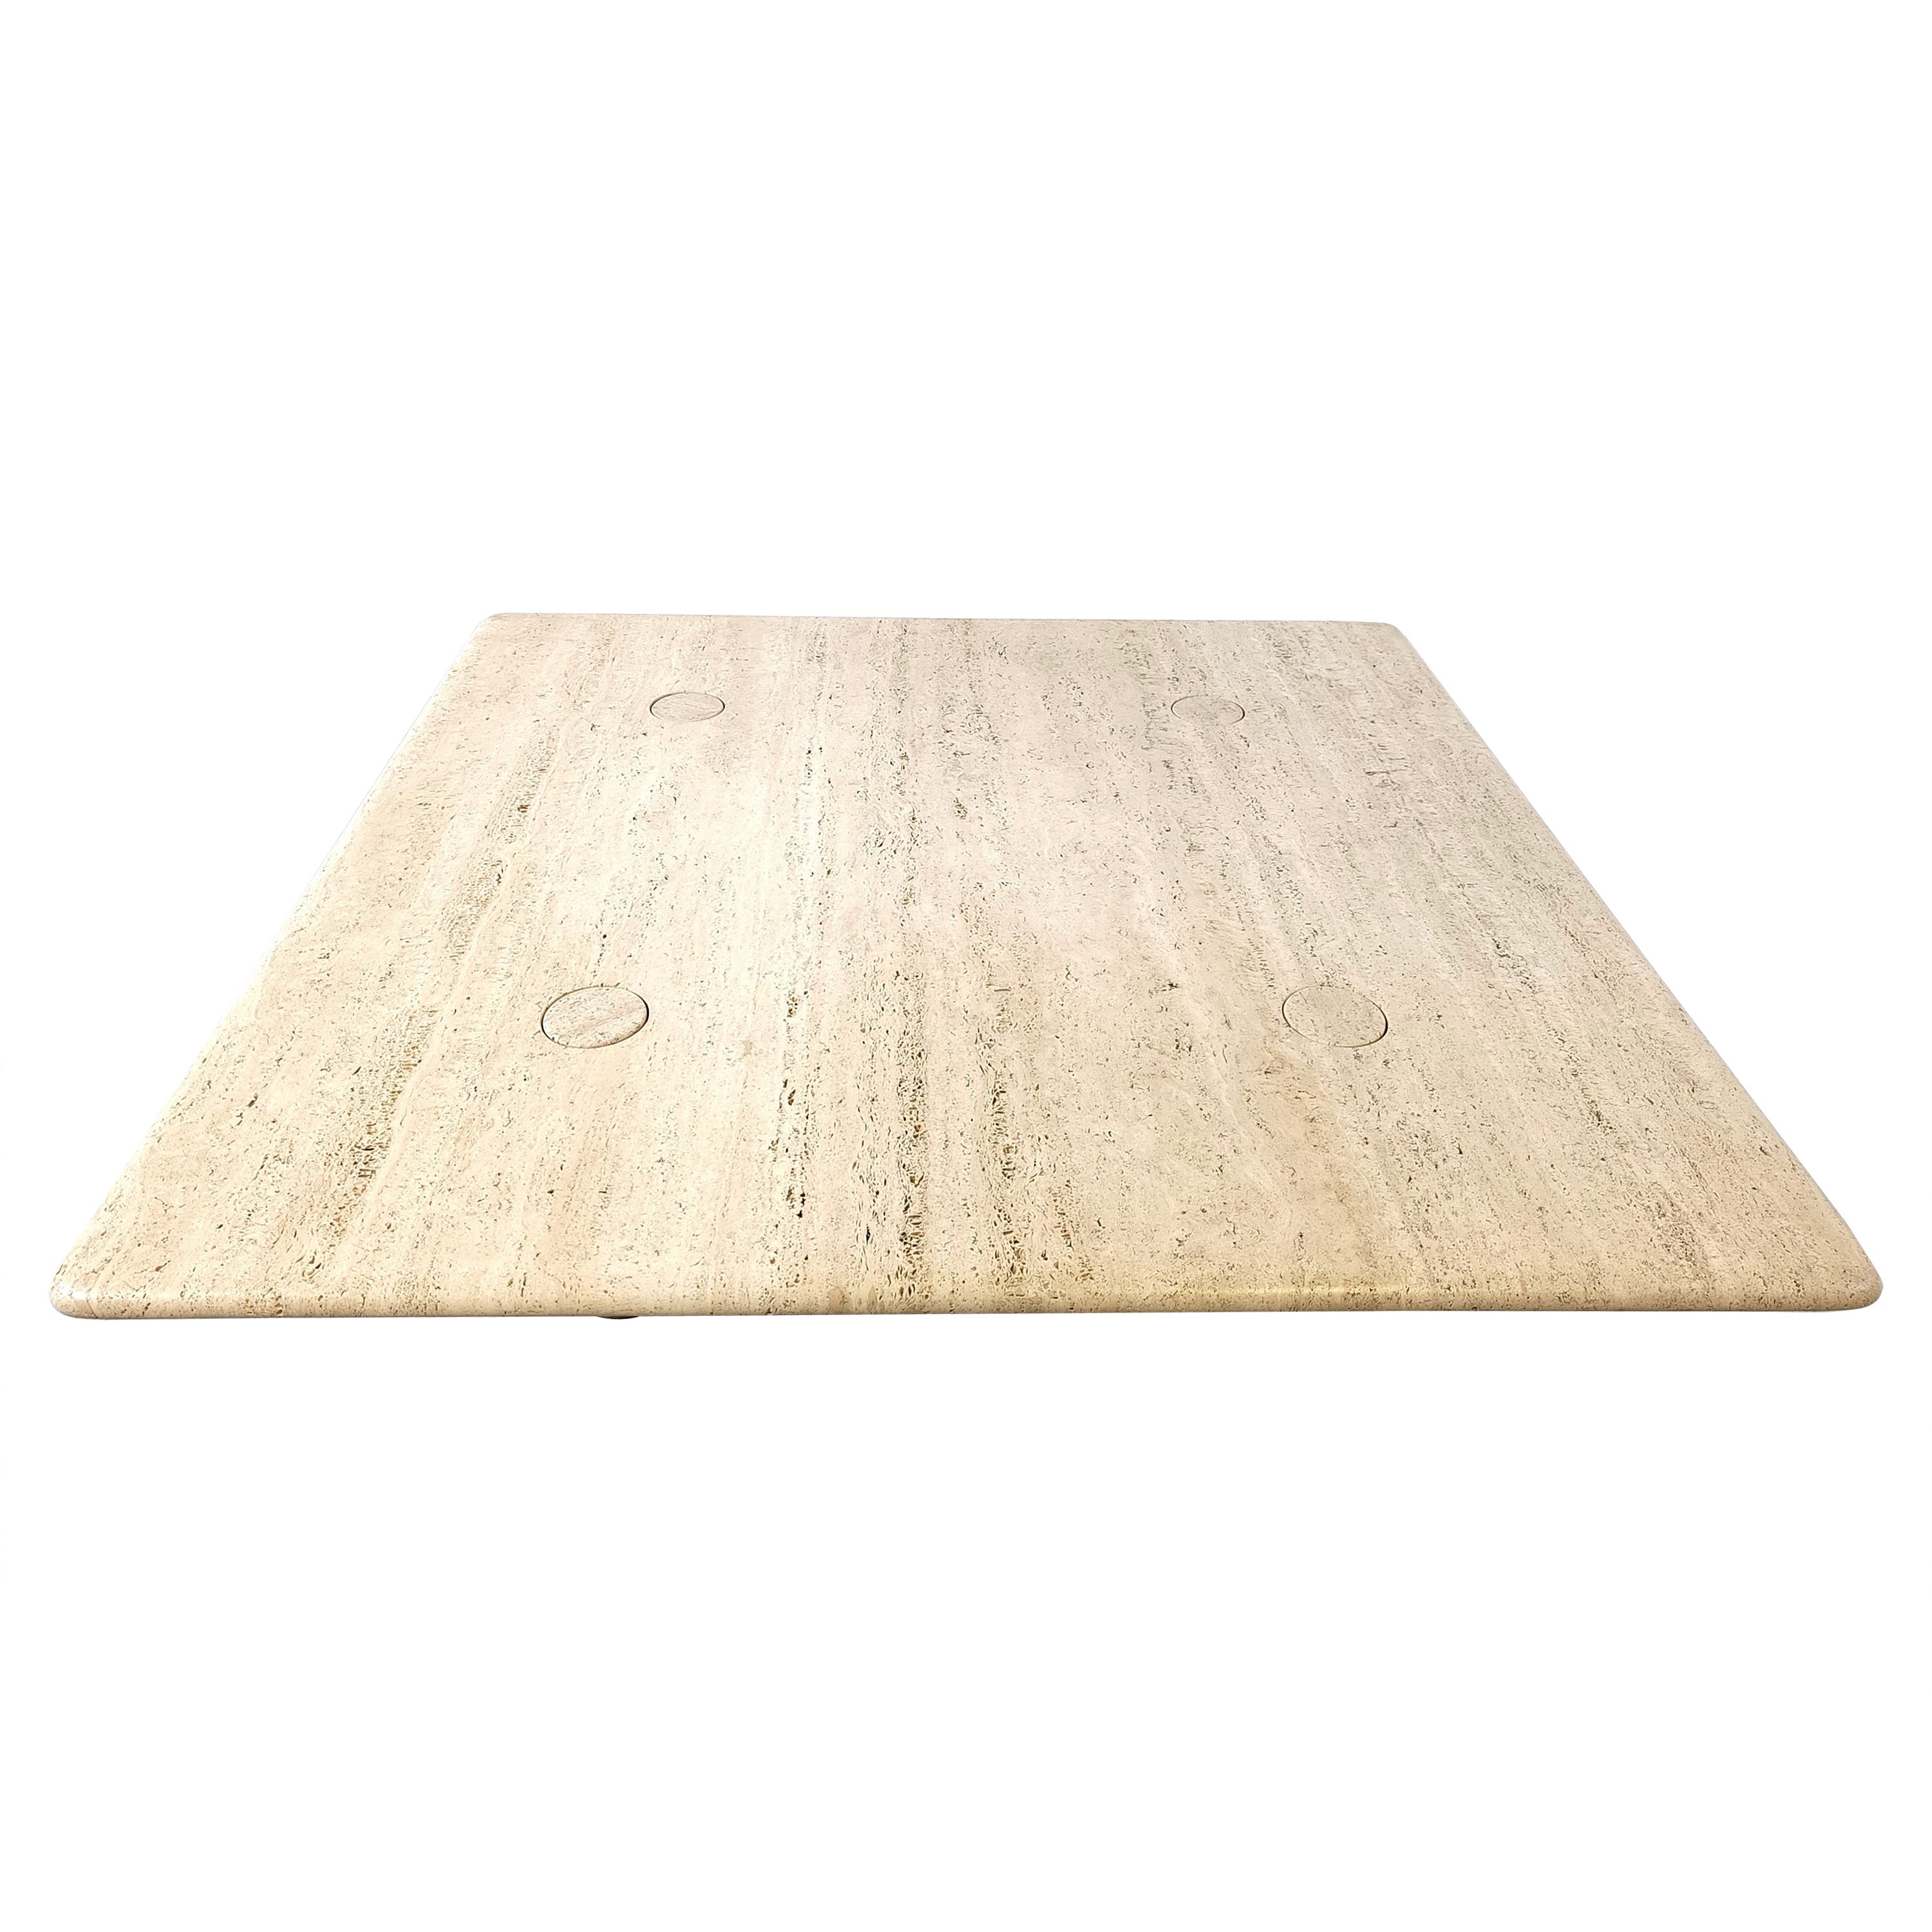 XL Angelo Mangiarotti Travertine Coffee Table for Up&Up, Italy For Sale